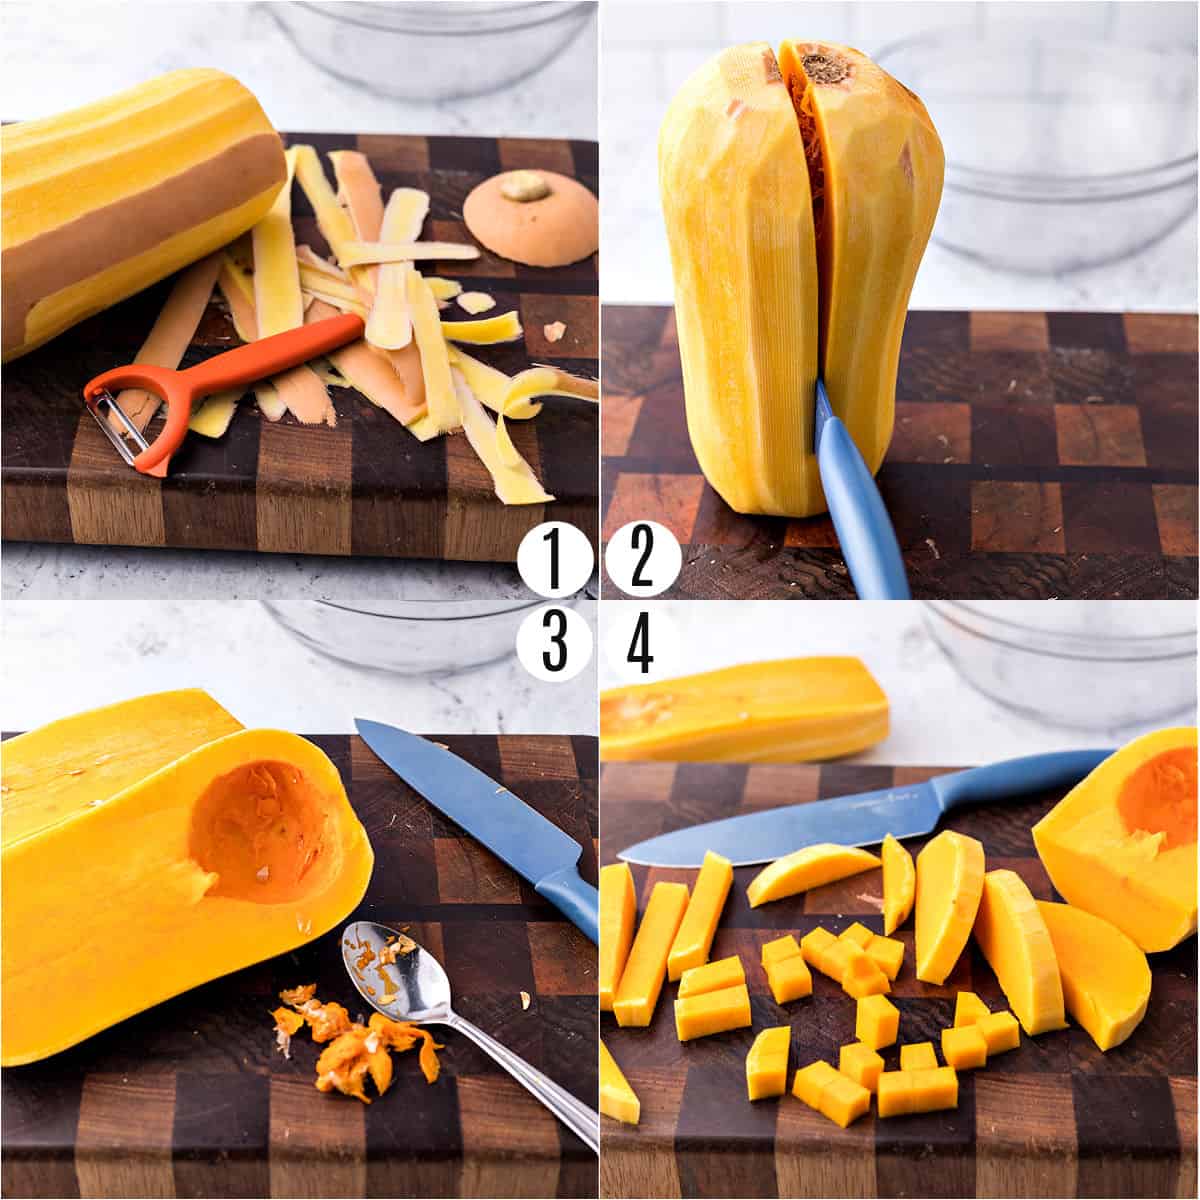 Step by step photos showing how to cut a butternut squash.